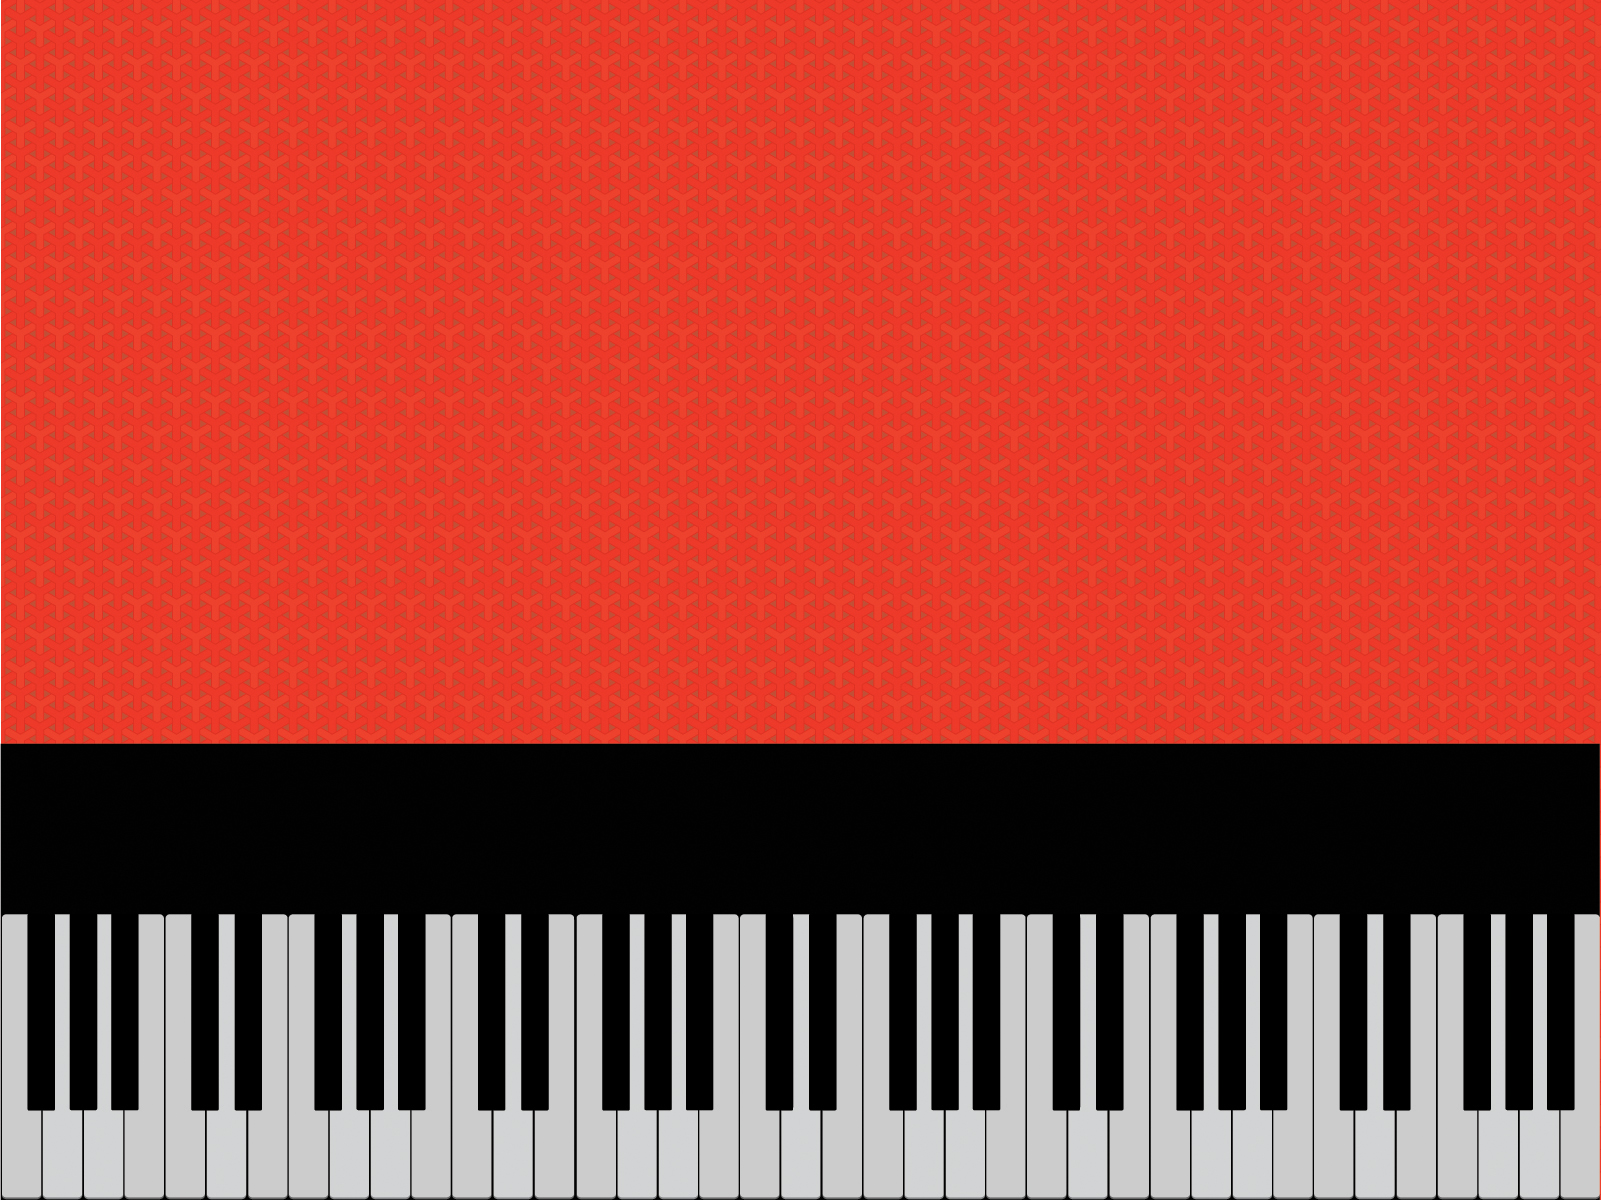 Piano on Red PPT Backgrounds